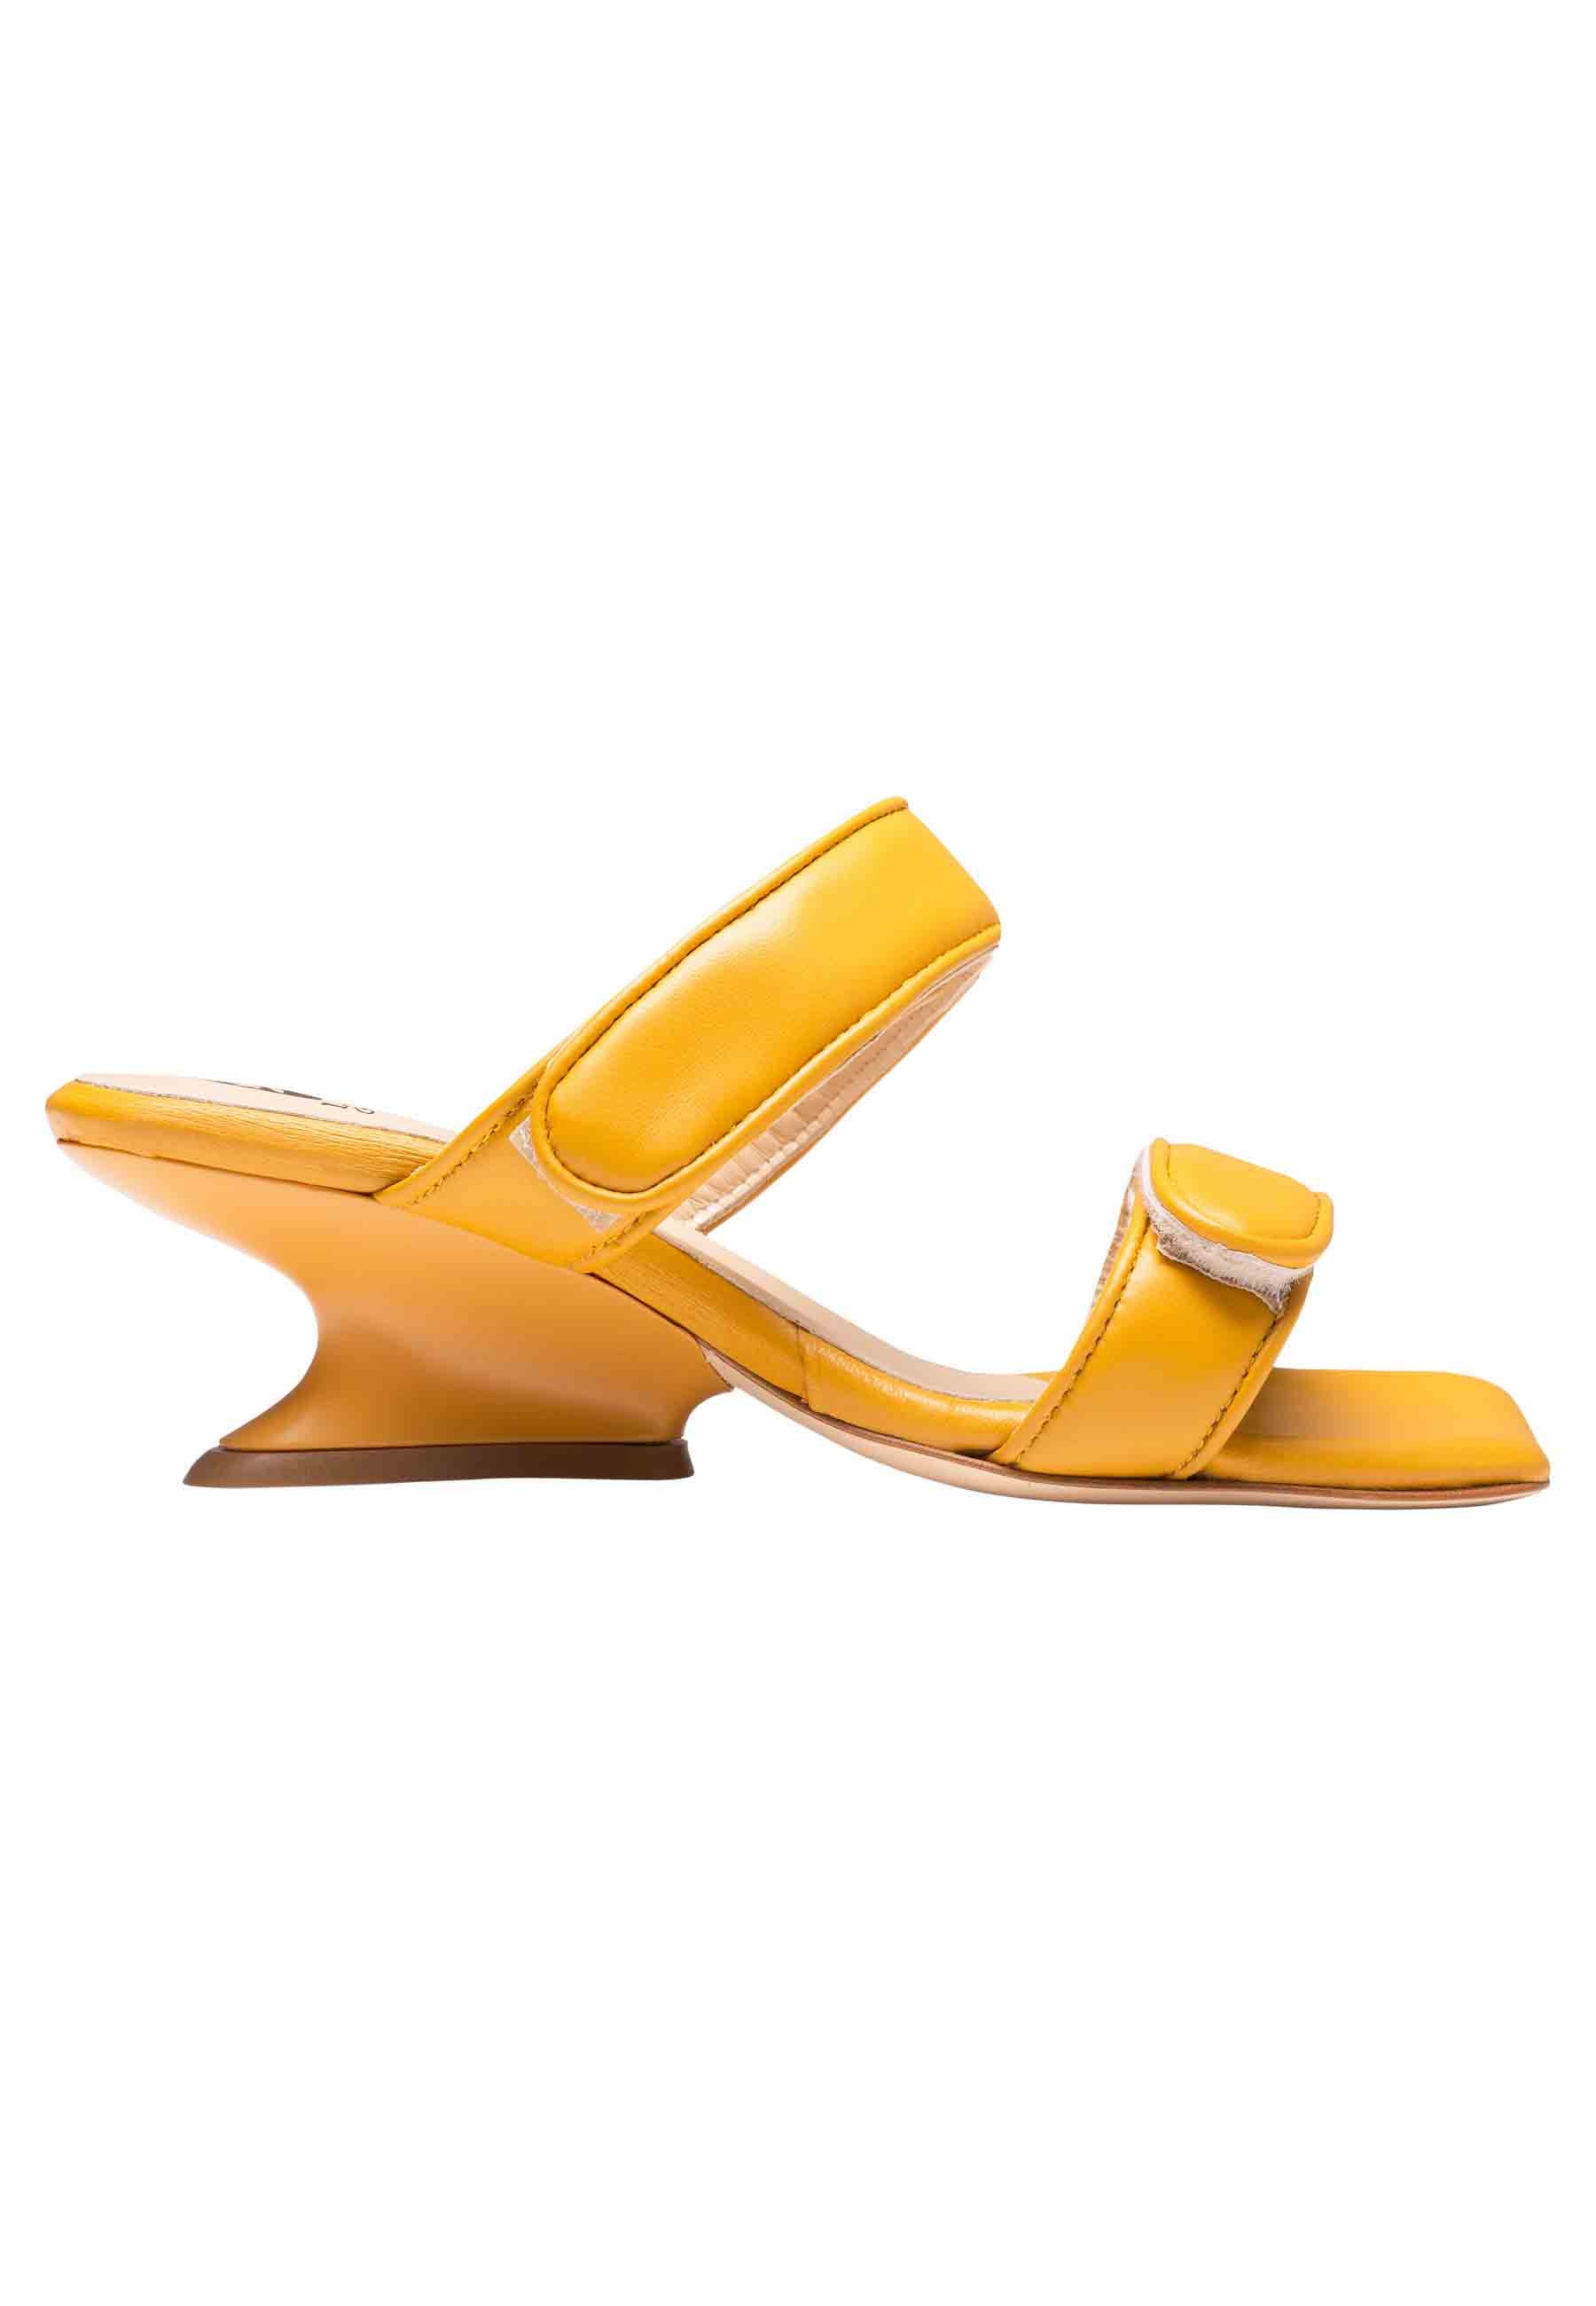 Women's saffron yellow leather sandals with matching wedge heel